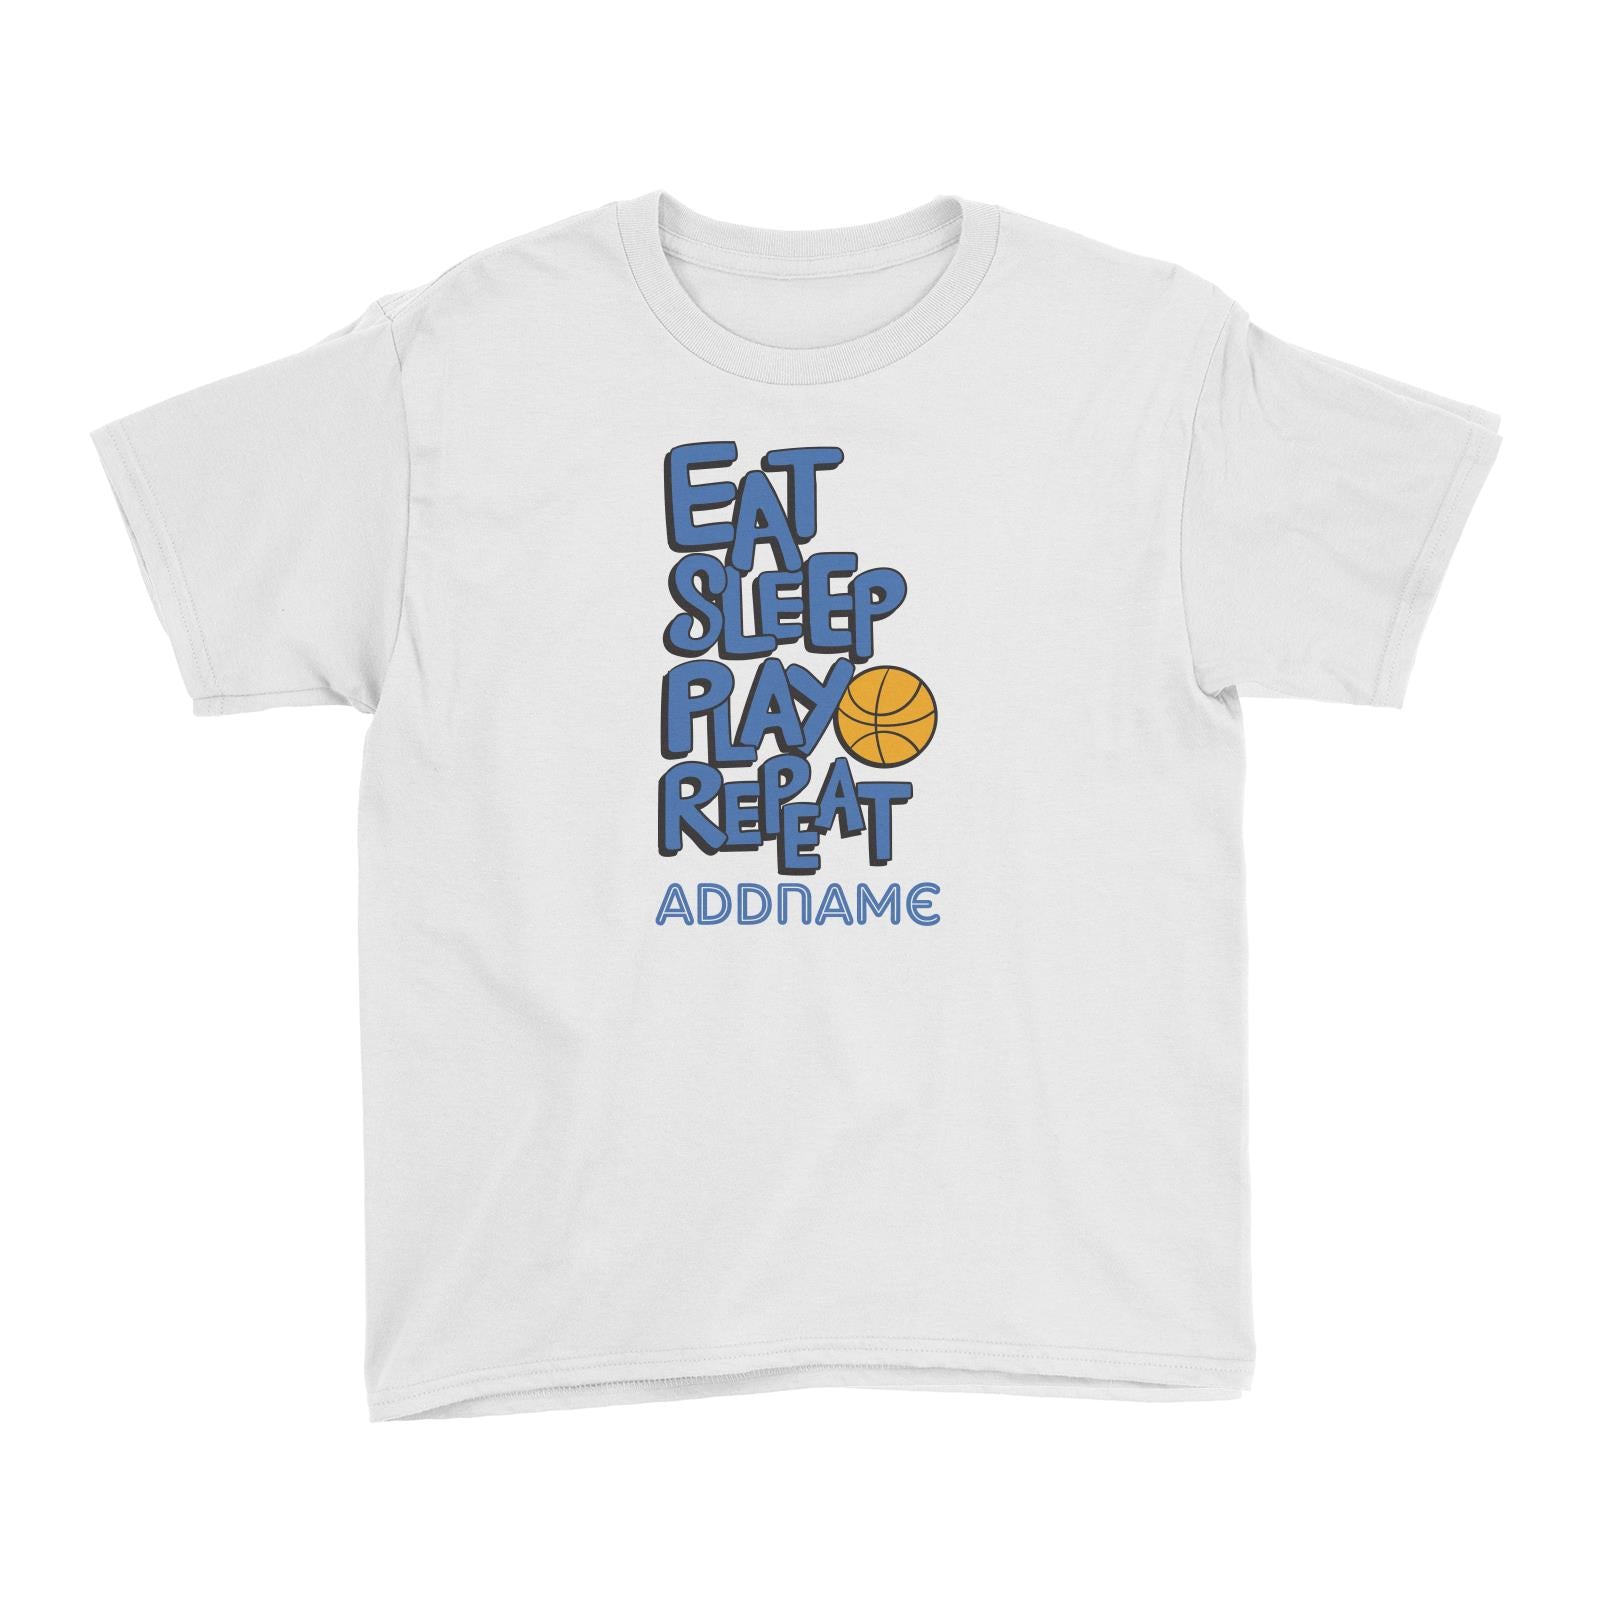 Cool Cute Words Eat Sleep Play Repeat Addname Kid's T-Shirts